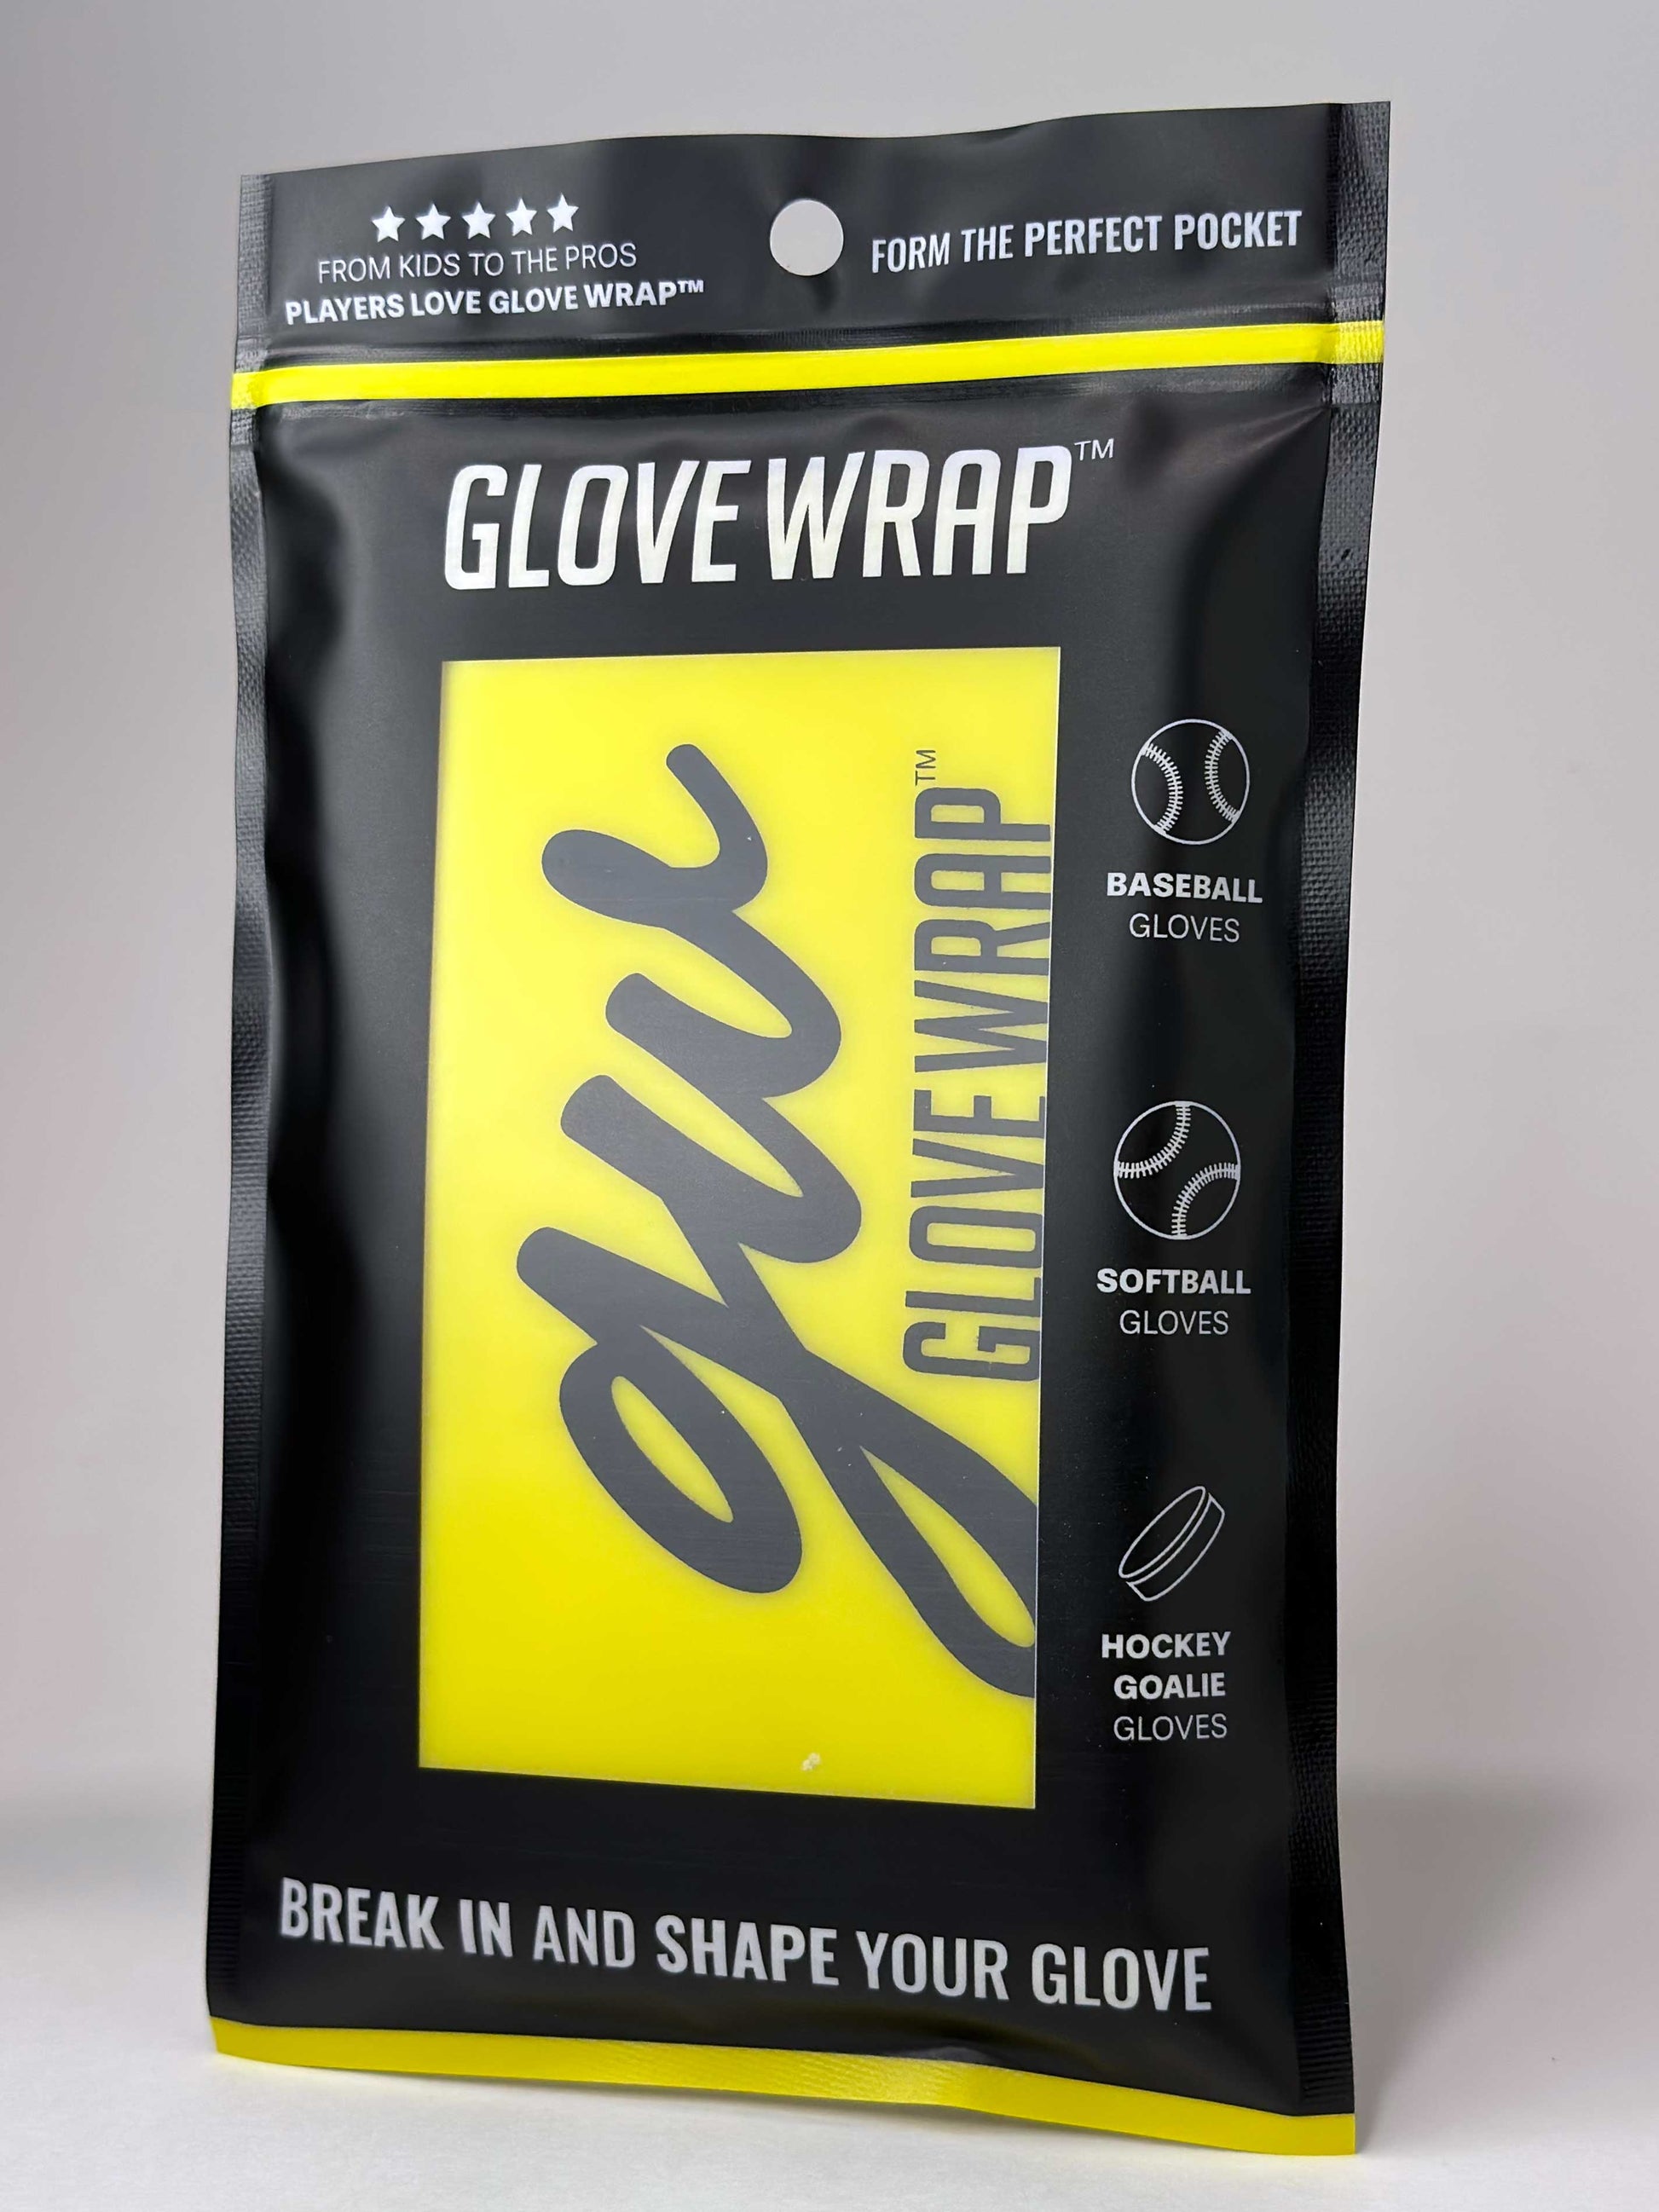 Off-Wrap™️  For Those Who Live Off Wrap.